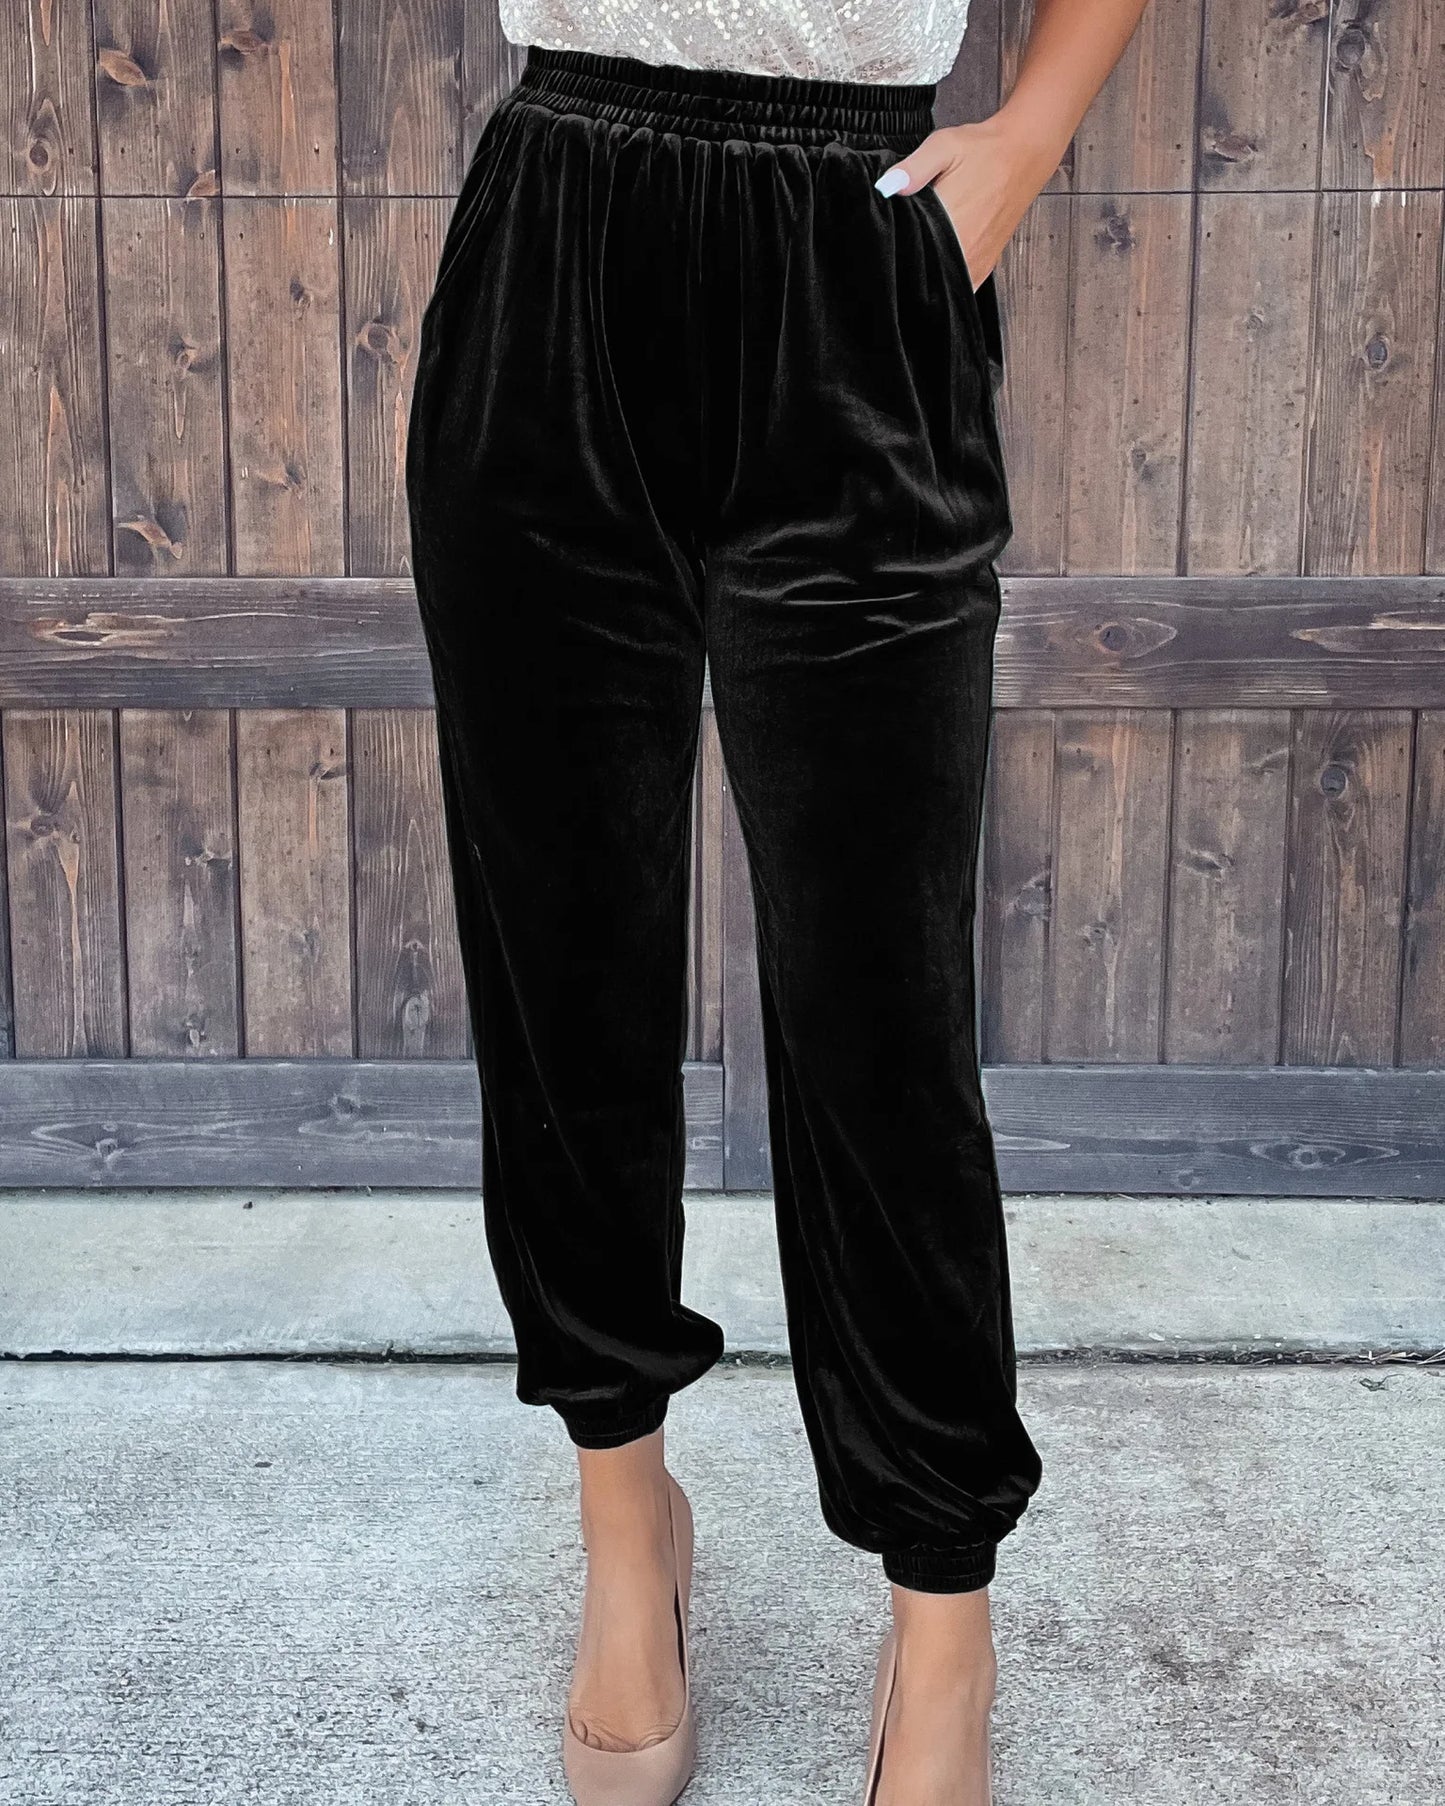 Winter's New Soft Stretch Velvet Velour Joggers With Pockets in 7 Colors Sweatpants